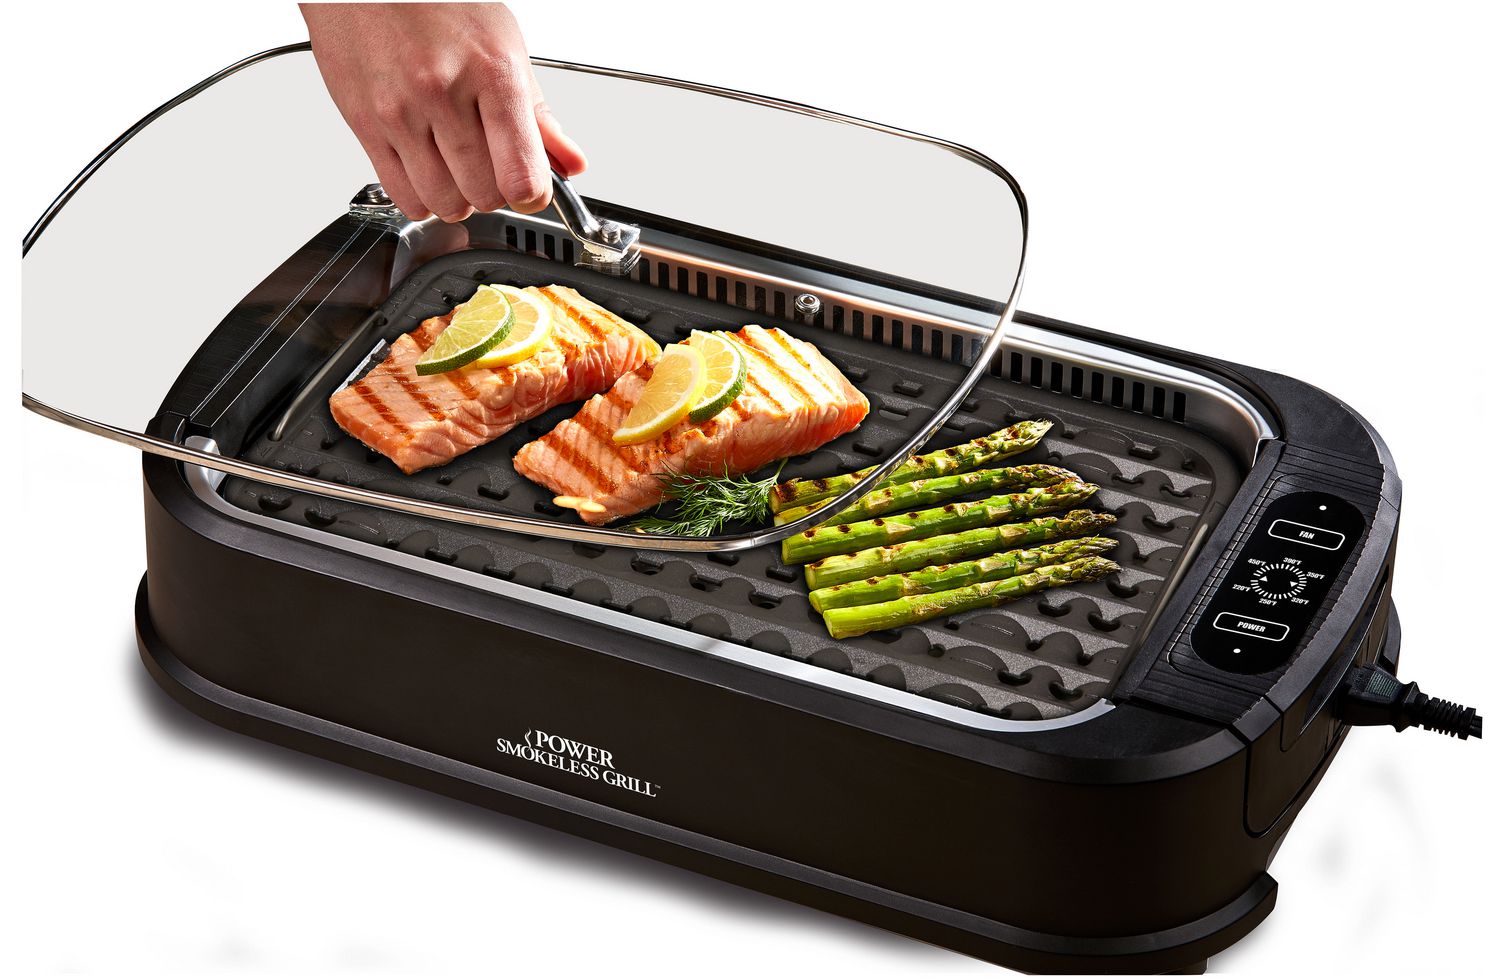 12 Amazing Power Smokeless Grill As Seen On Tv for 2023